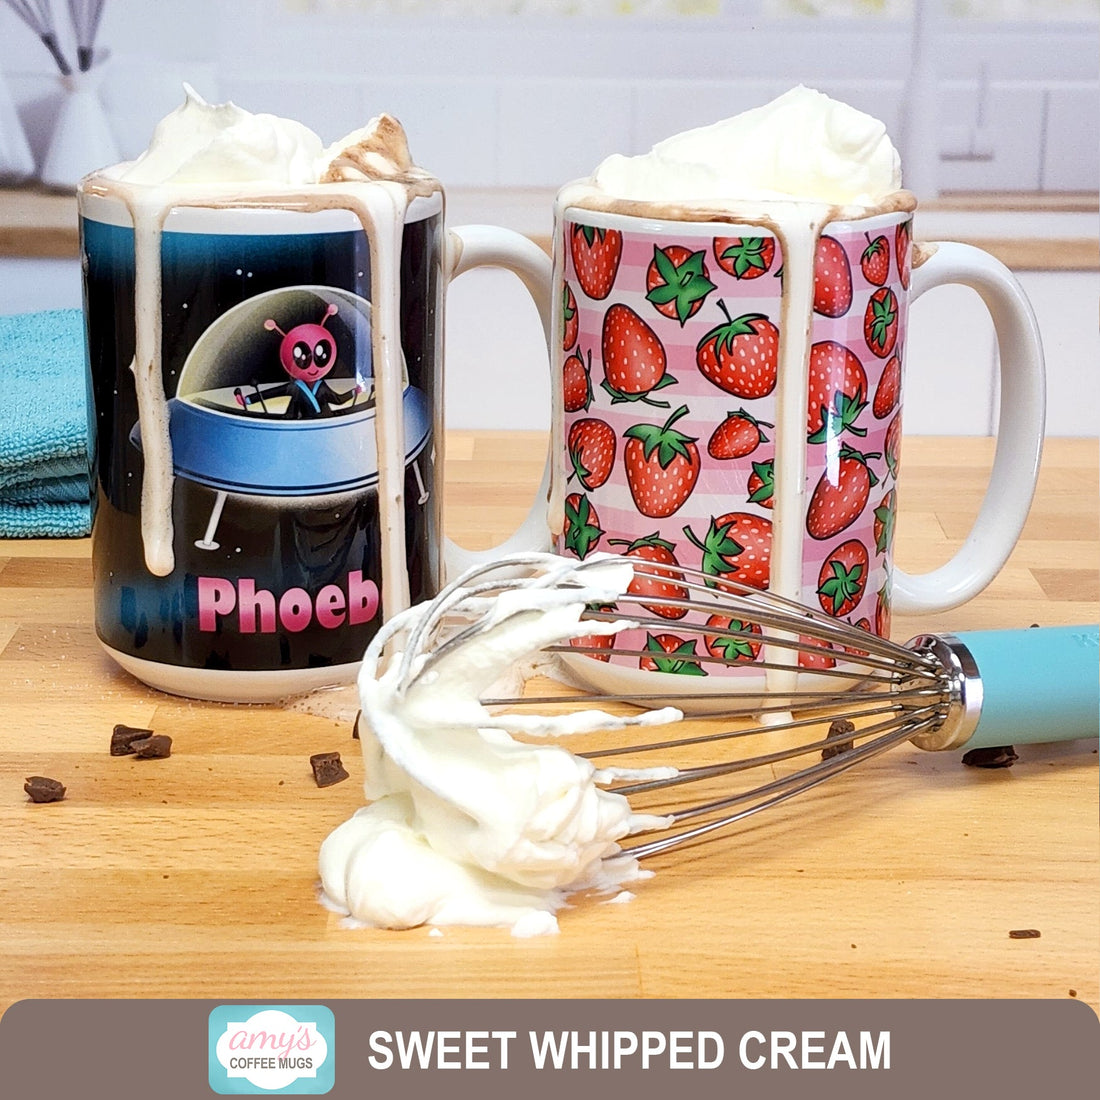 Sweet Whipped Cream in hot chocolate mugs and on whisk on kitchen island - Amy's Coffee Mugs